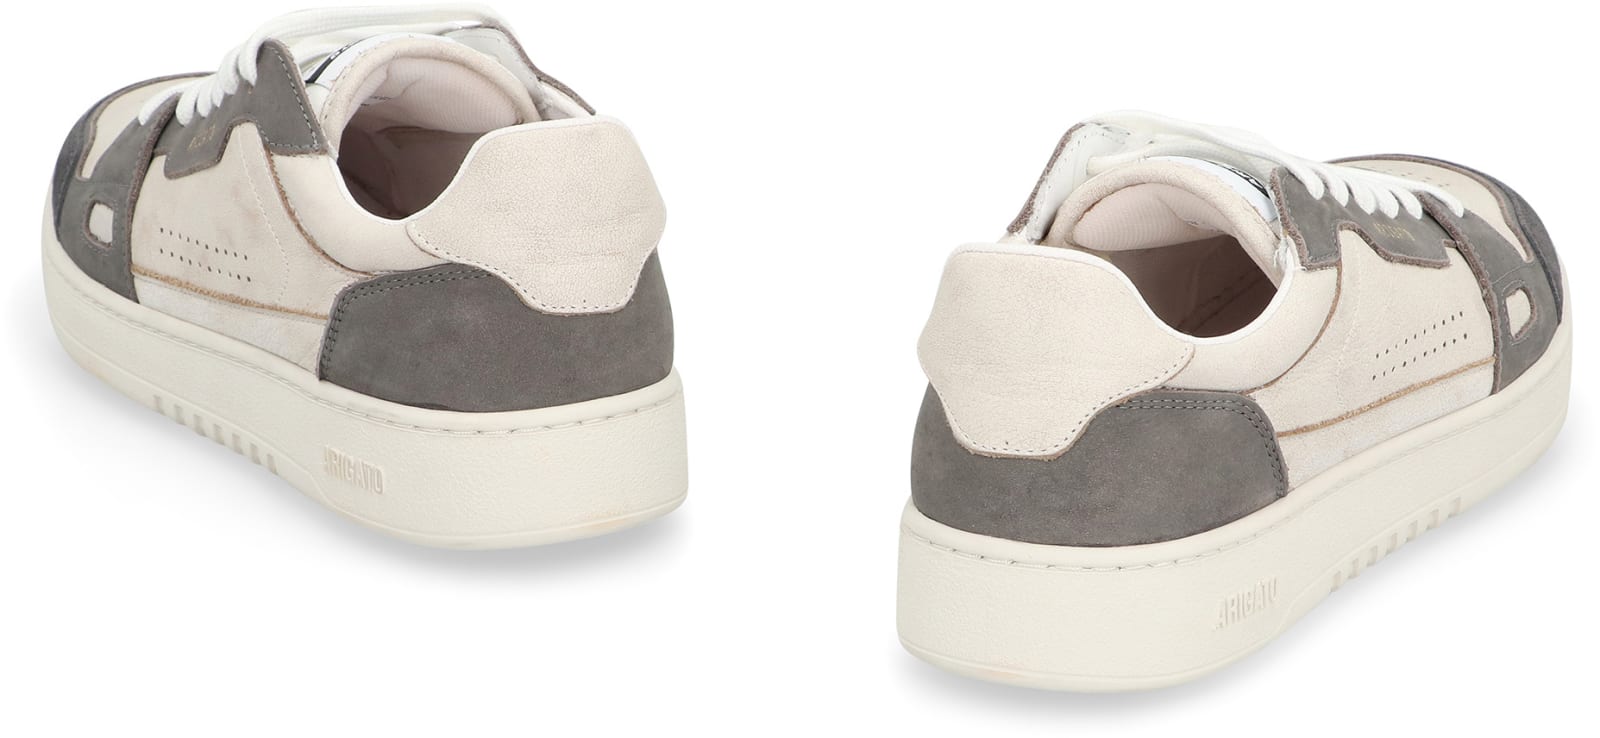 Shop Axel Arigato Dice Lo Leather Low-top Sneakers In Grey